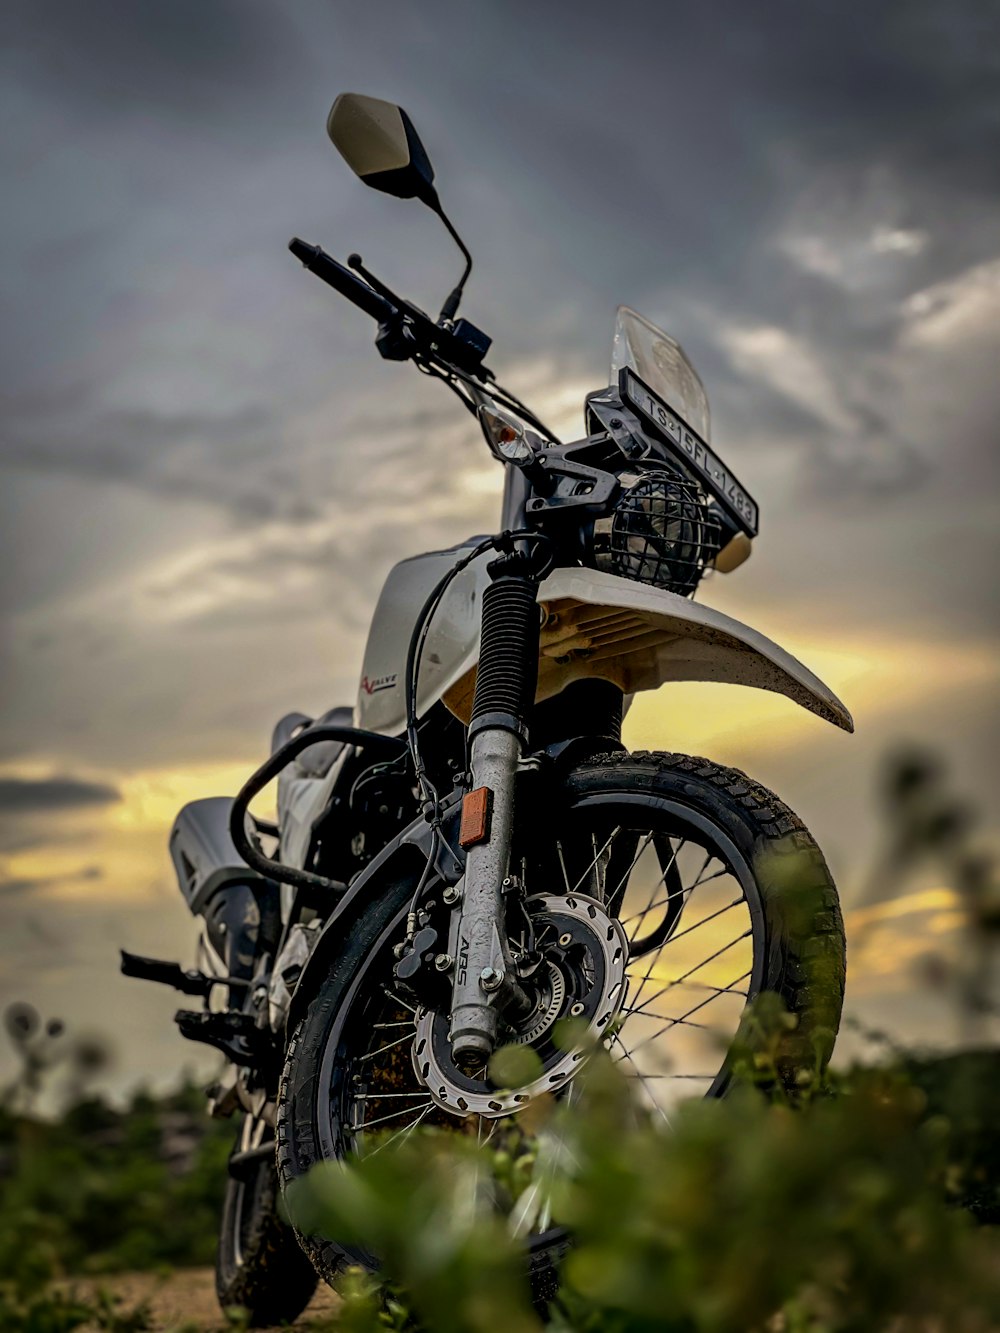 a motorcycle parked on a dirt road under a cloudy sky